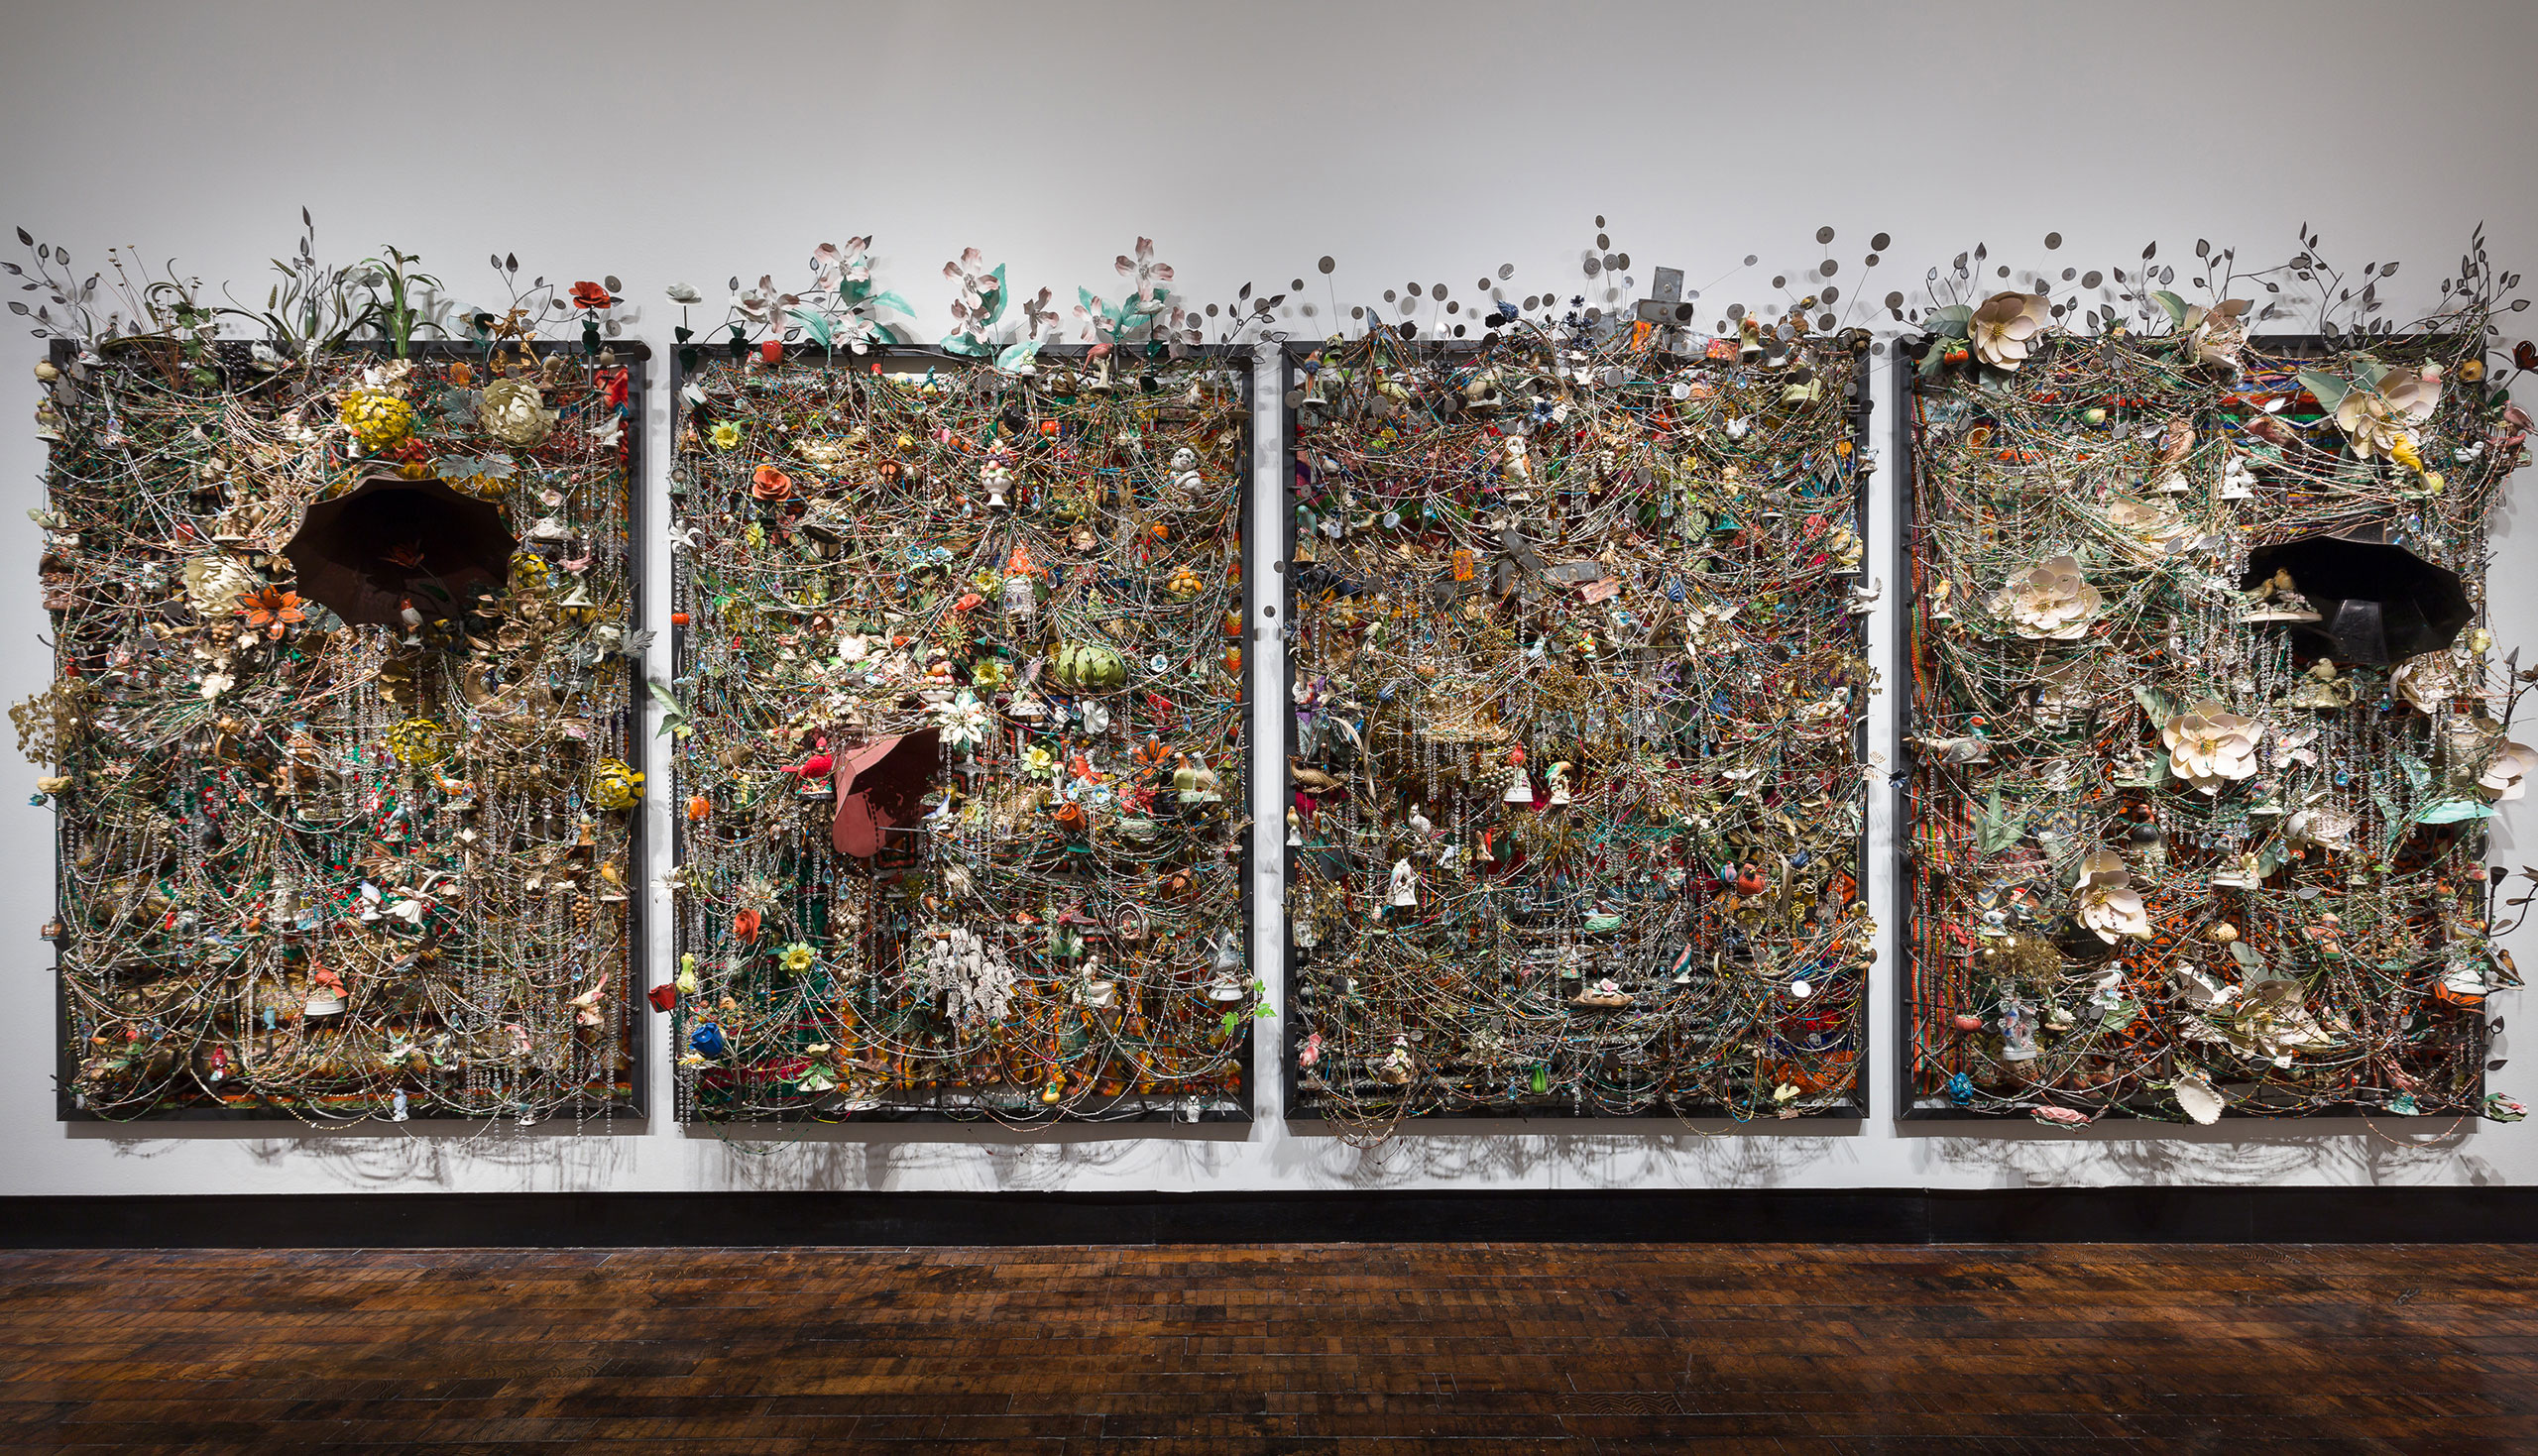 Nick Cave, Wall Relief, 2013. Mixed media including ceramic birds, metal flowers, afghans, strung beads, crystals and antique gramophone. 4 panels, each: 97 x 74 x 21 in. © Nick Cave. Courtesy of the artist and Jack Shainman Gallery, New York.